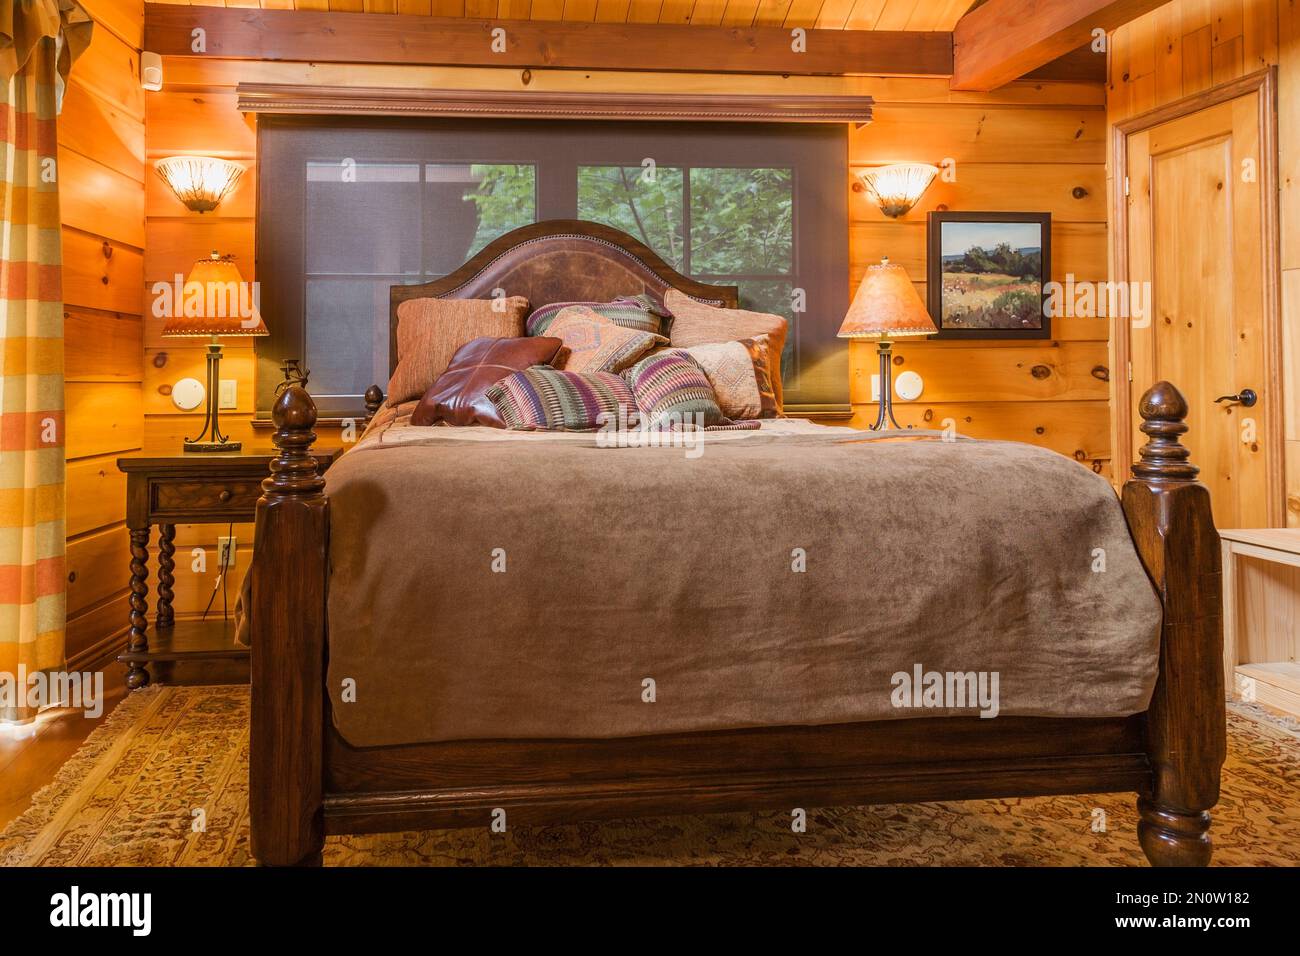 Antique queen size four poster bed and nightstand in master bedroom inside  milled cottage style flat log profile home, Quebec, Canada. This image is p  Stock Photo - Alamy